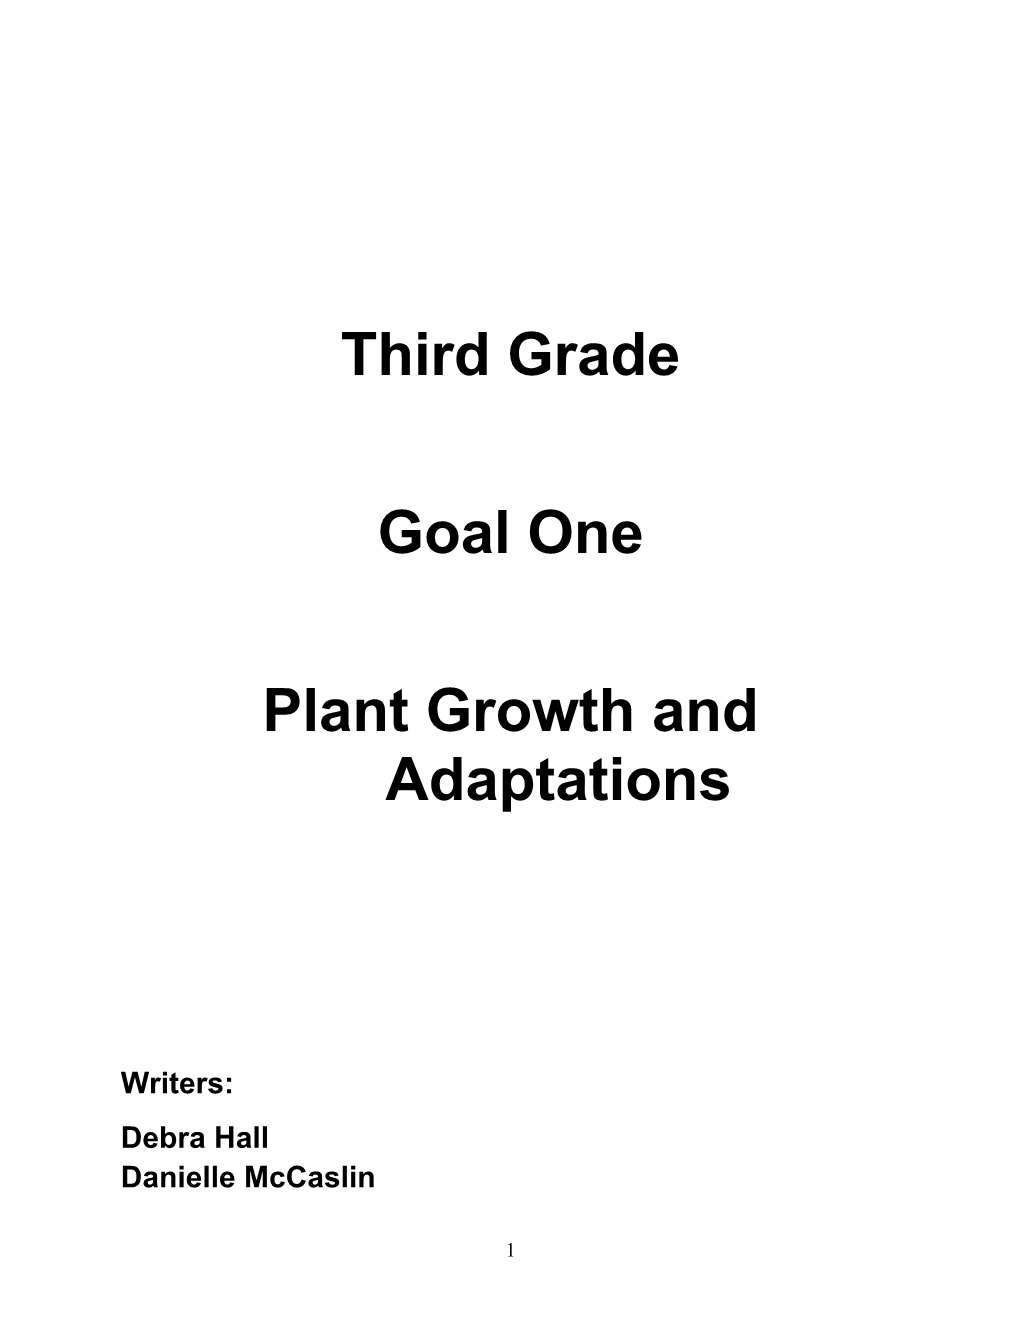 Plant Growth and Adaptations